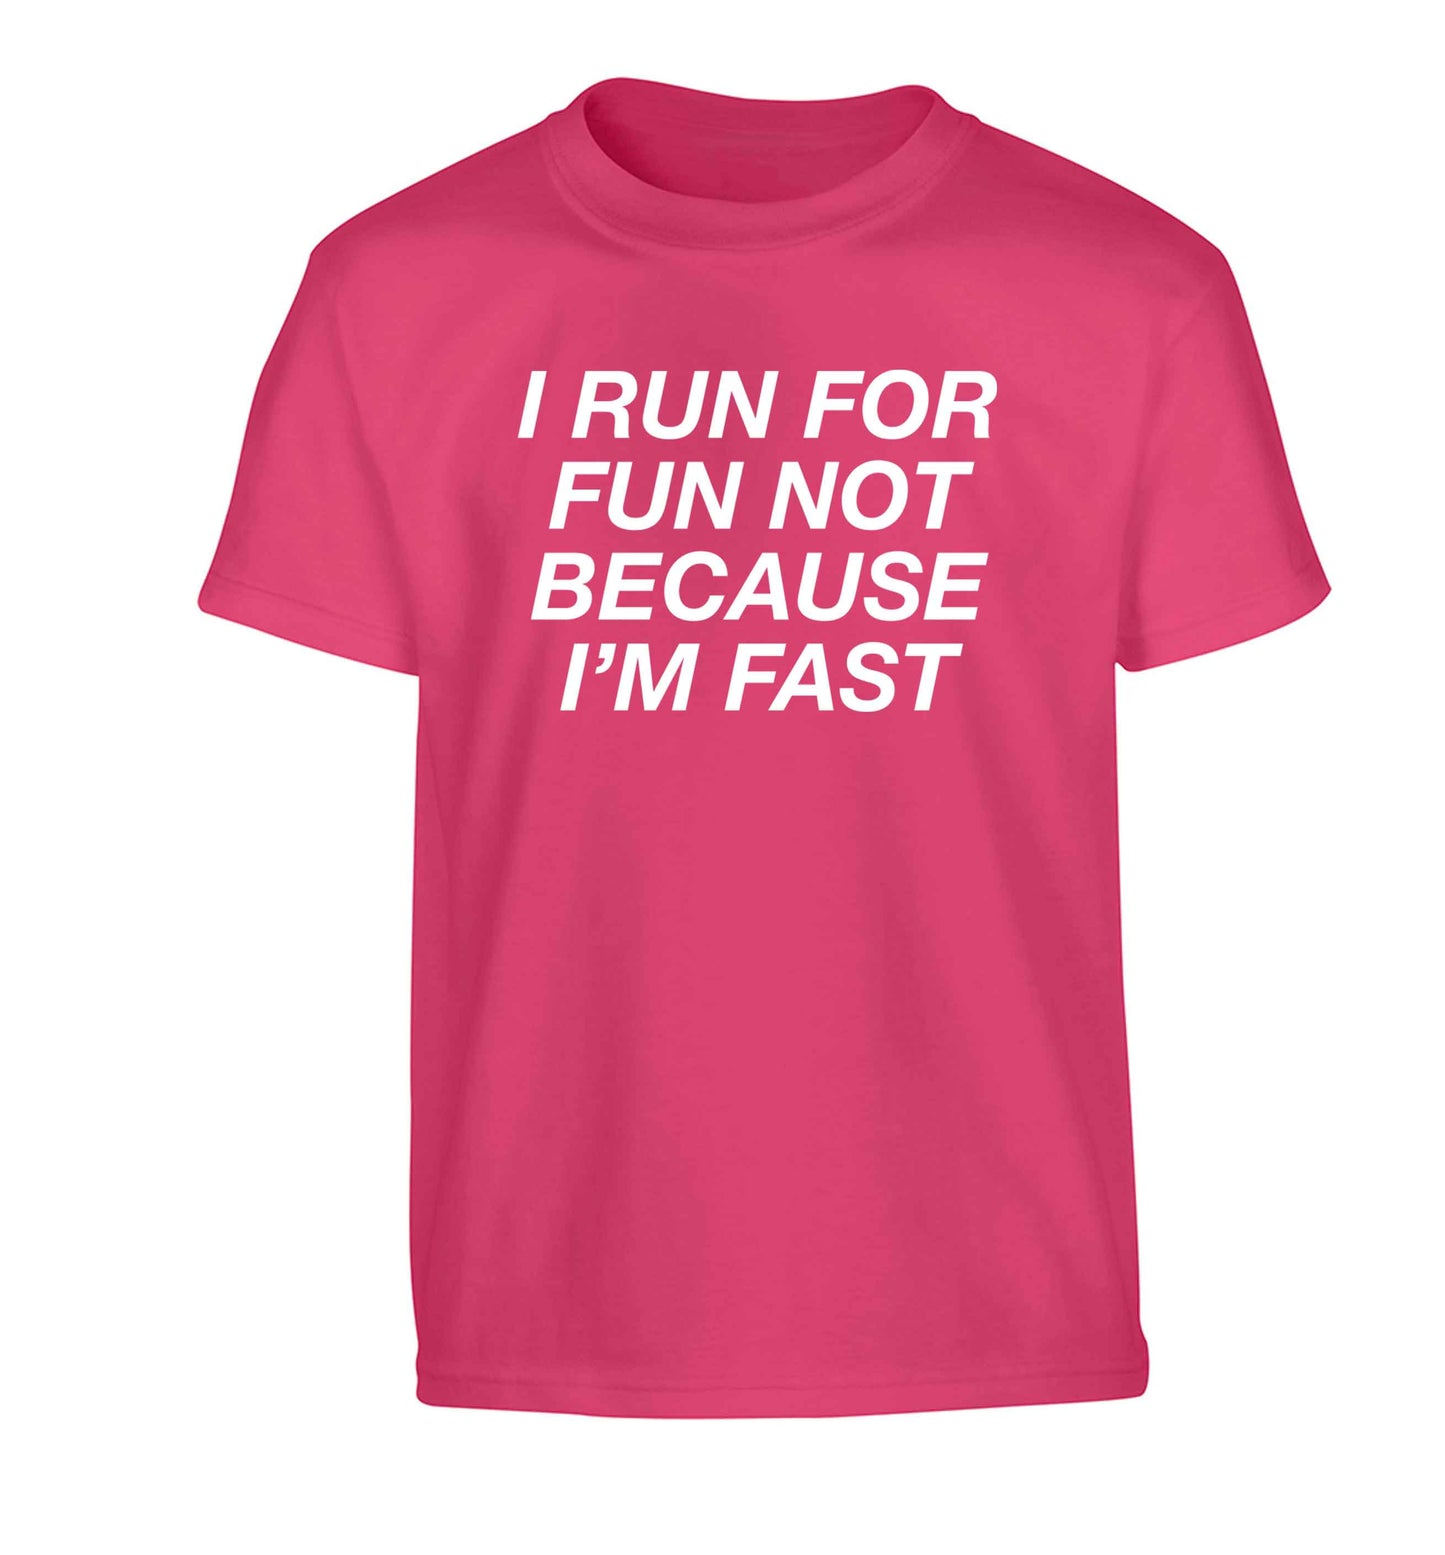 I run for fun not because I'm fast Children's pink Tshirt 12-13 Years